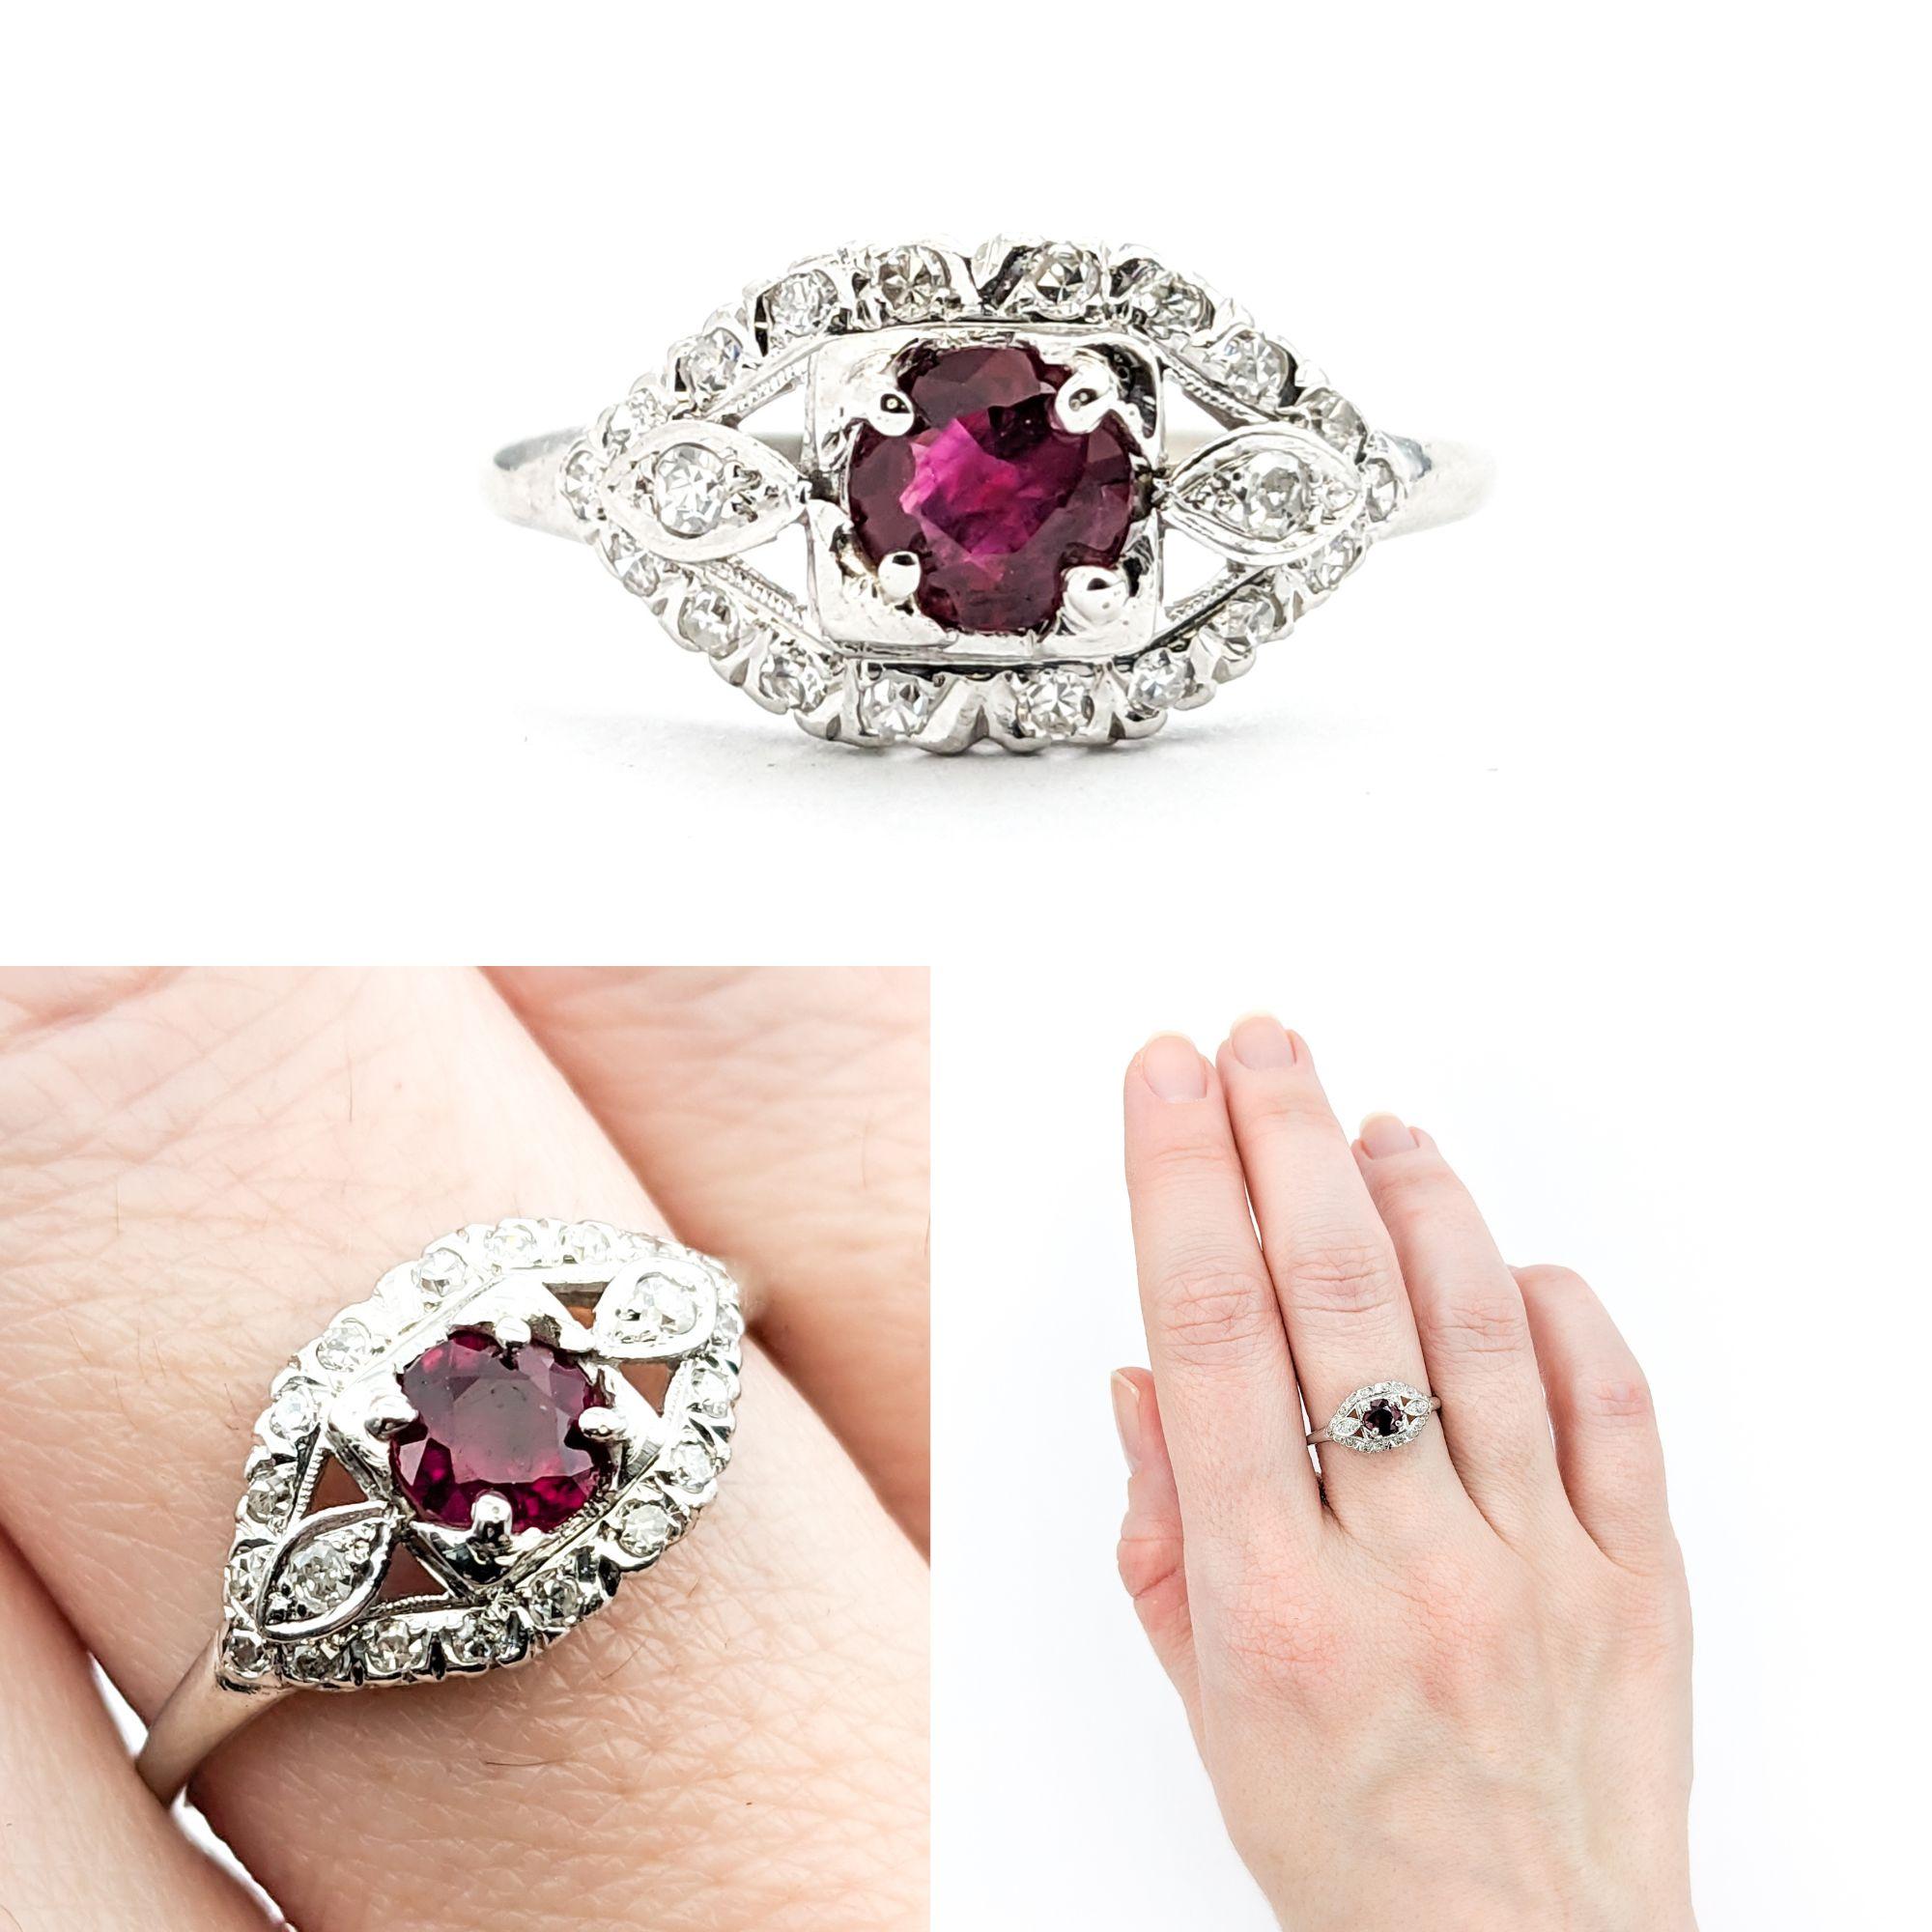 .52ct Ruby & Diamonds Ring In Platinum


Unveil the allure of this exquisite ring, masterfully crafted in 900pt White Gold. It proudly showcases .25ctw of sparkling single cut diamonds, boasting I clarity and a near colorless white hue. At the heart